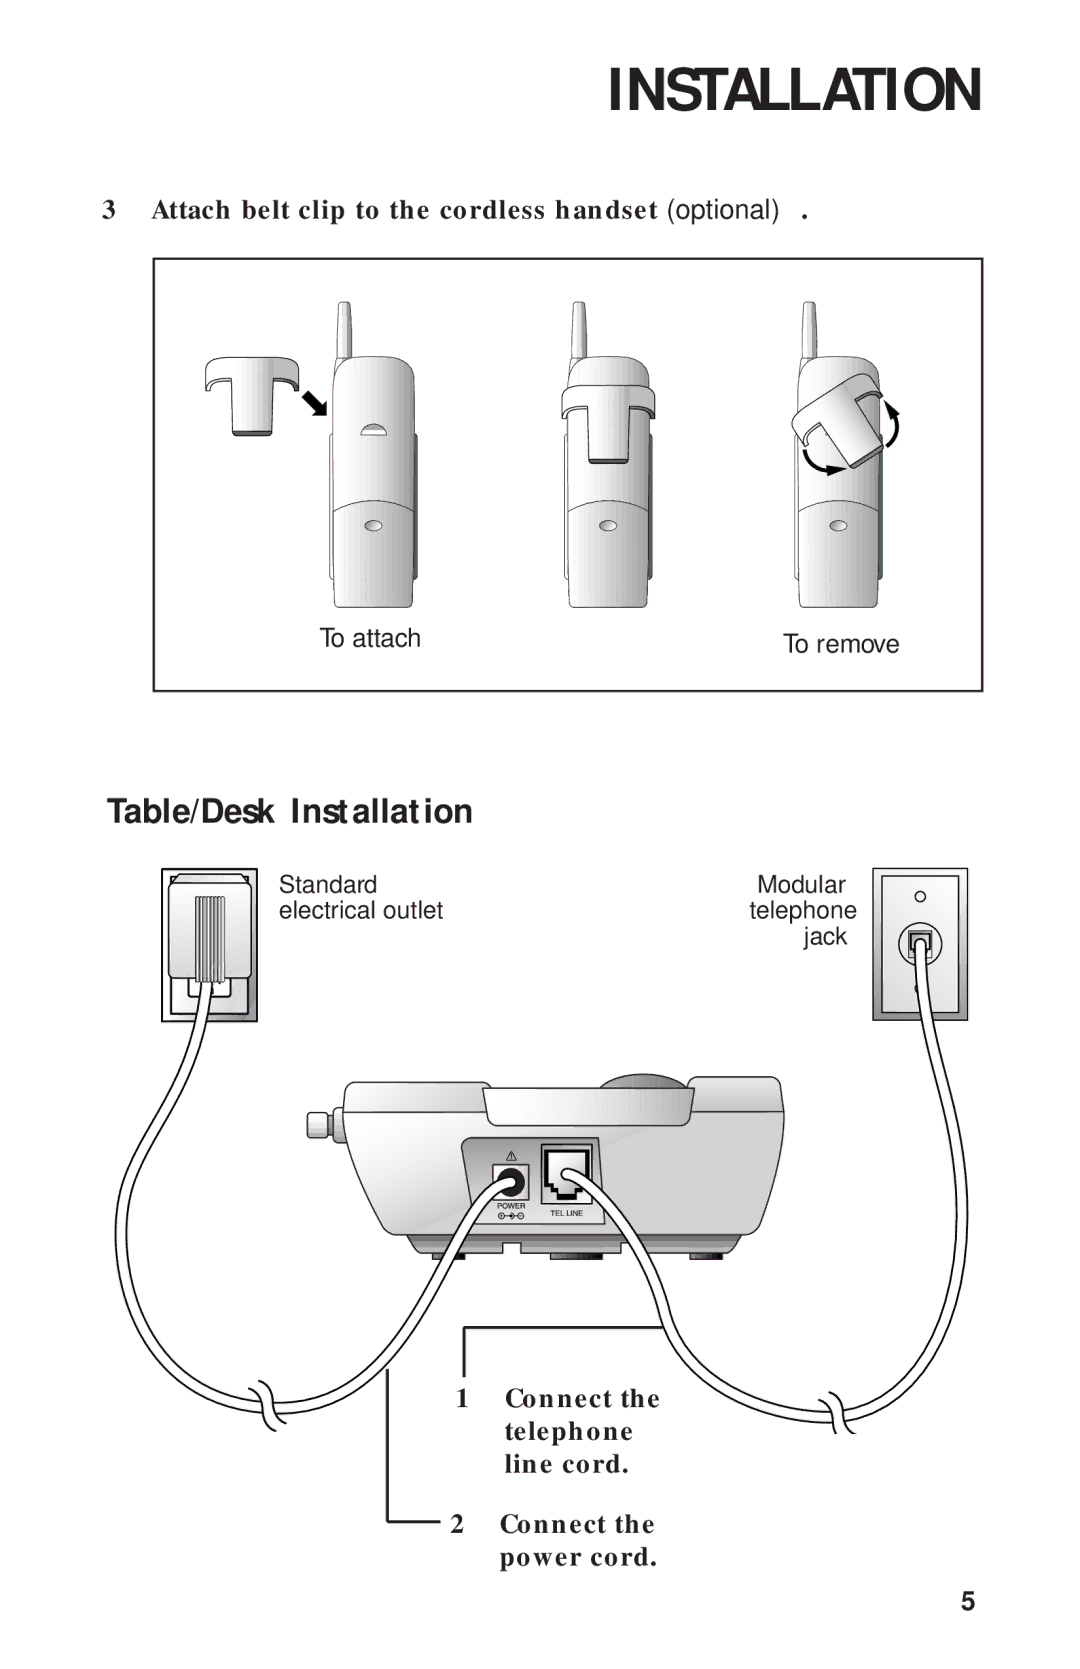 AT&T HS-8241 user manual Table/Desk Installation 